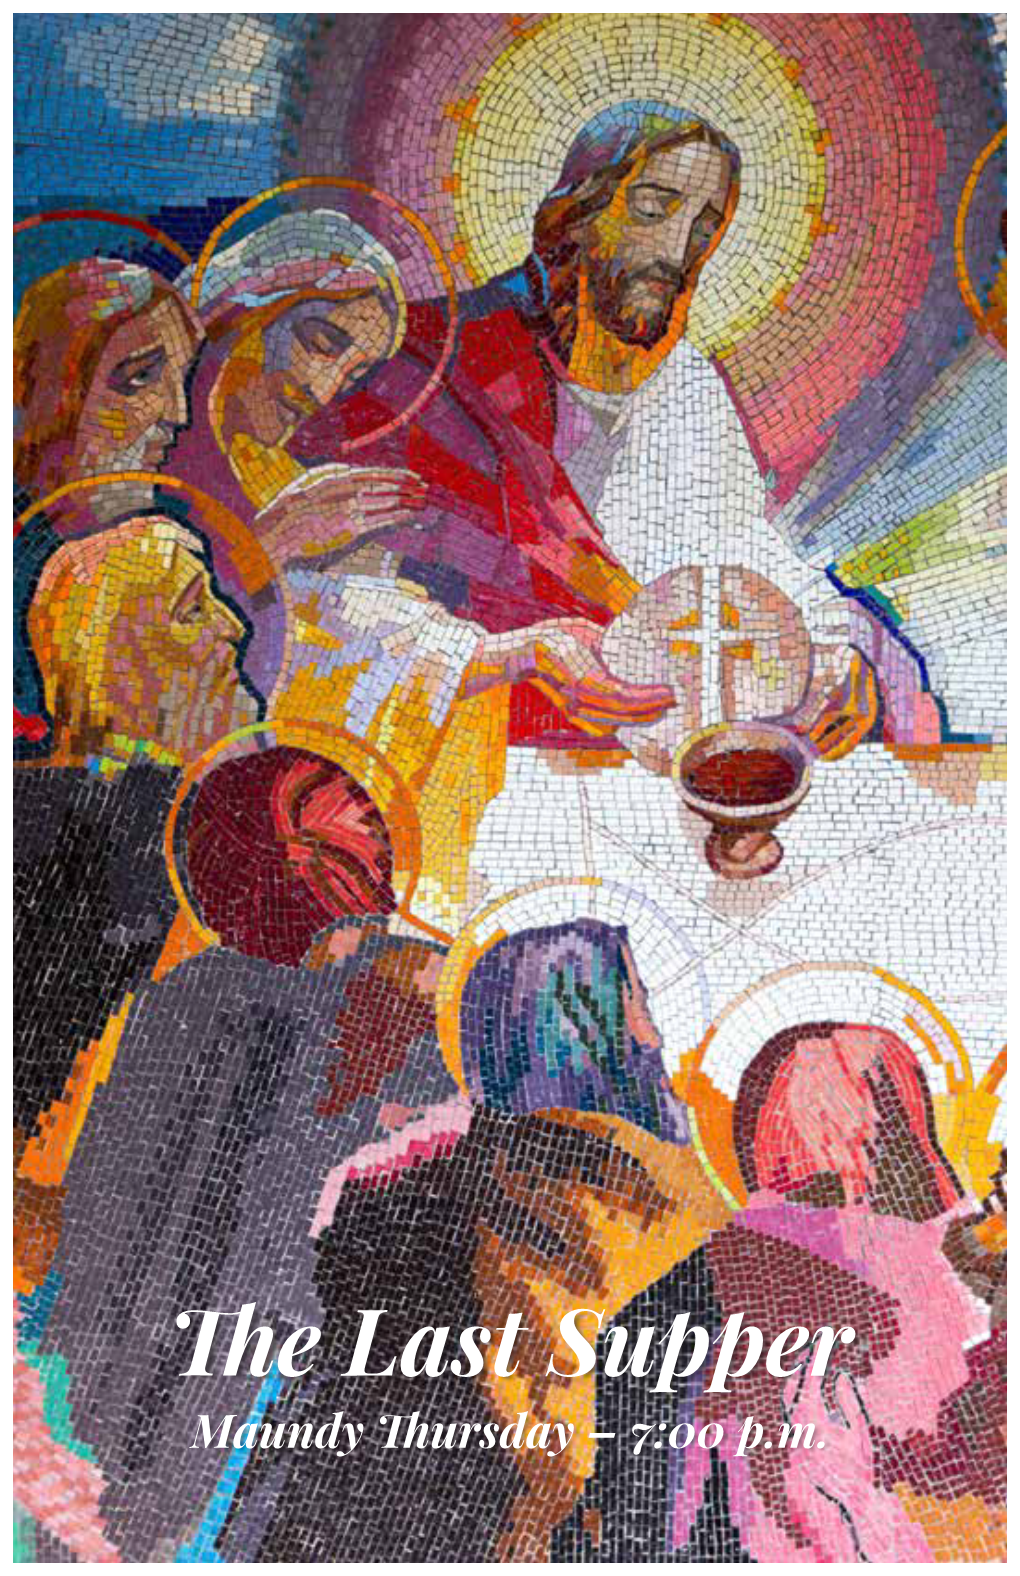 The Last Supper Maundy Thursday – 7:00 P.M